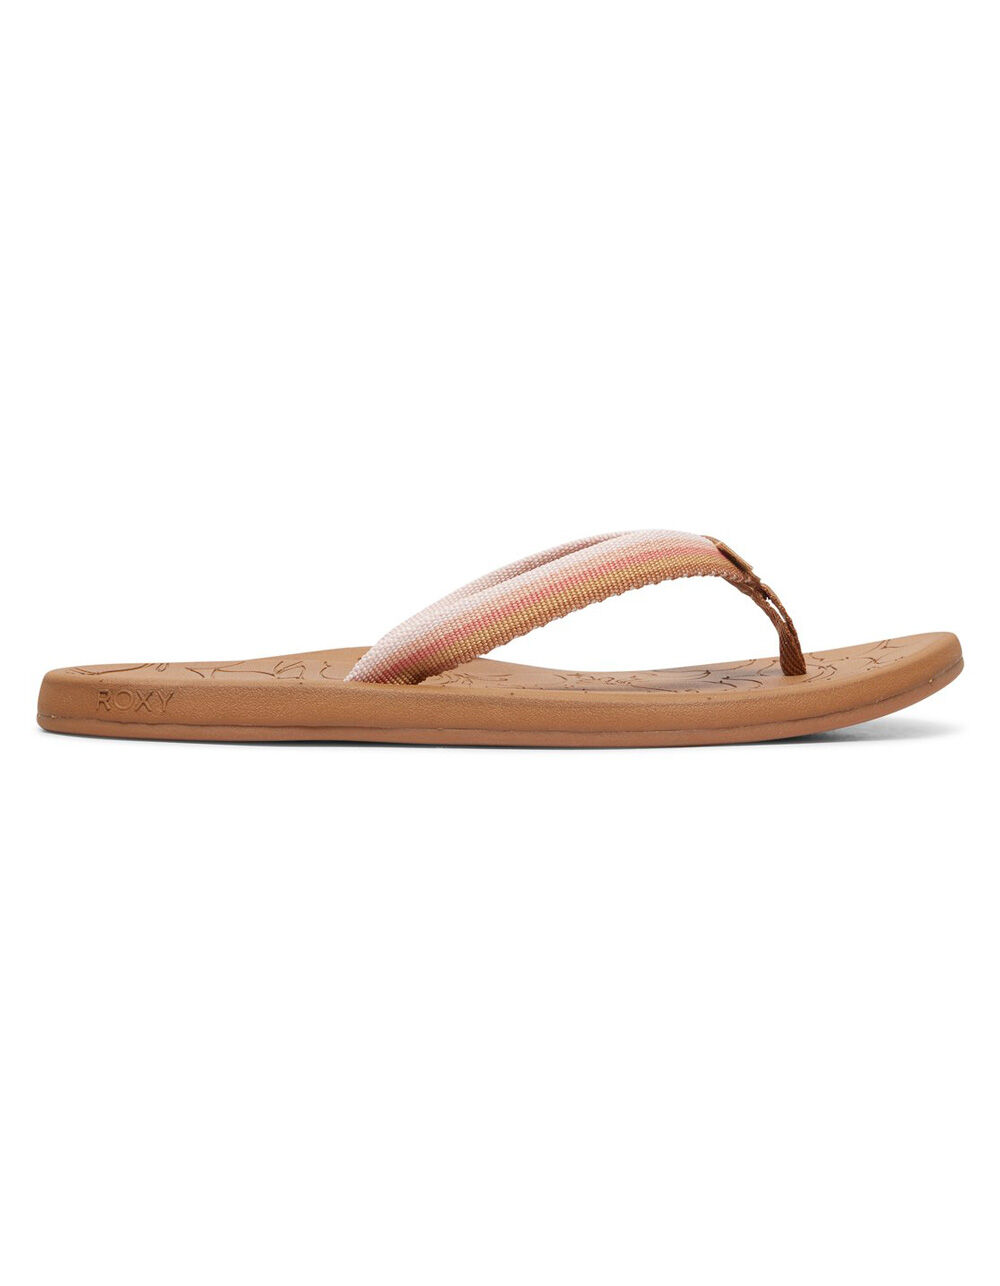 ROXY Colbee Womens Sandals - BLUSH | Tillys